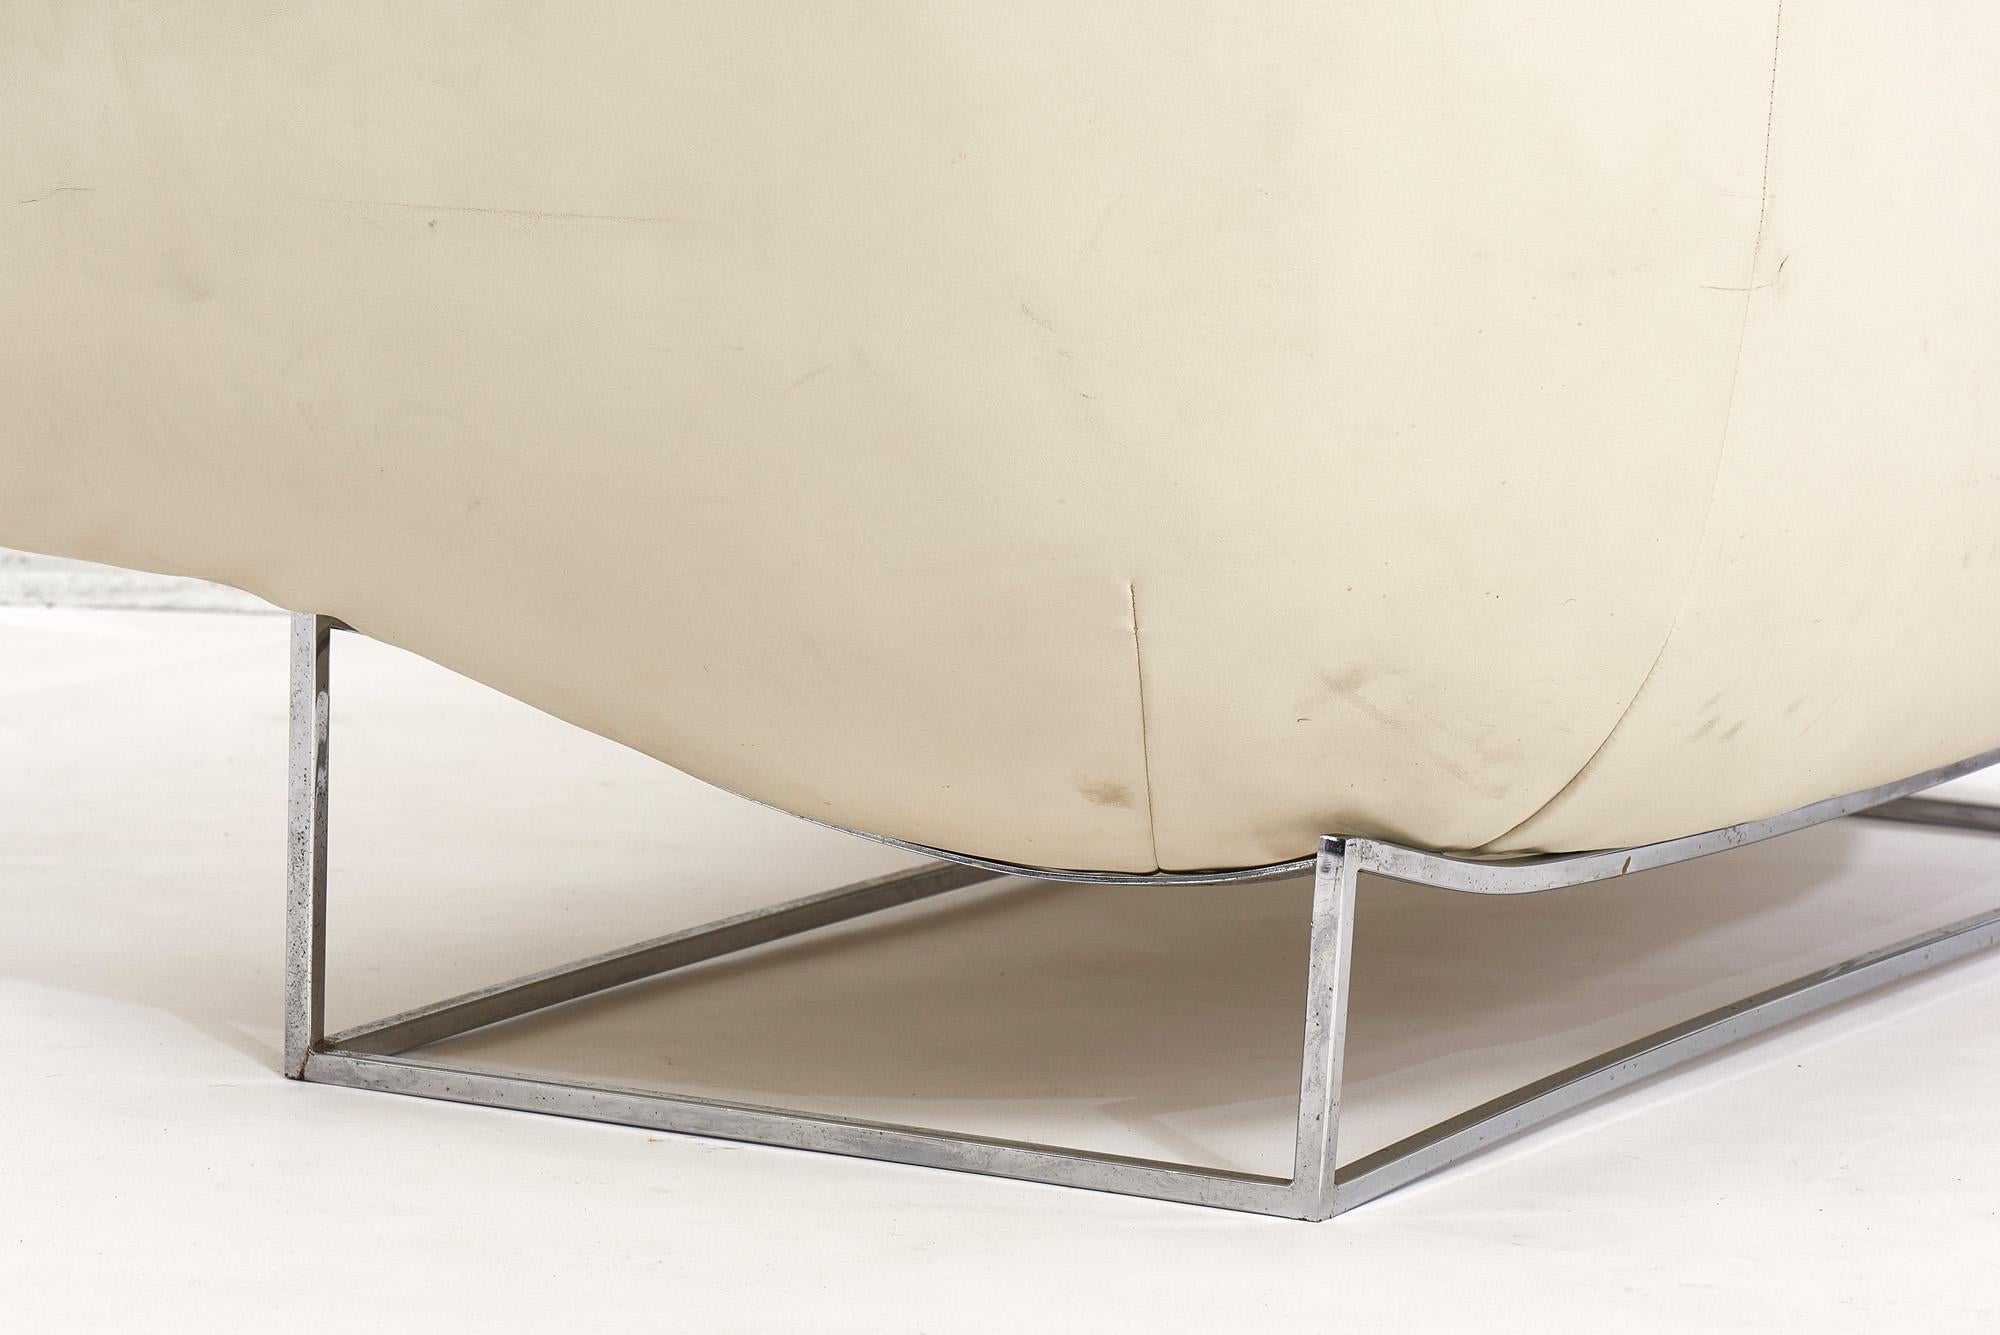 Faux Leather Milo Baughman for Thayer Coggin Floating Chrome Settee, 1970